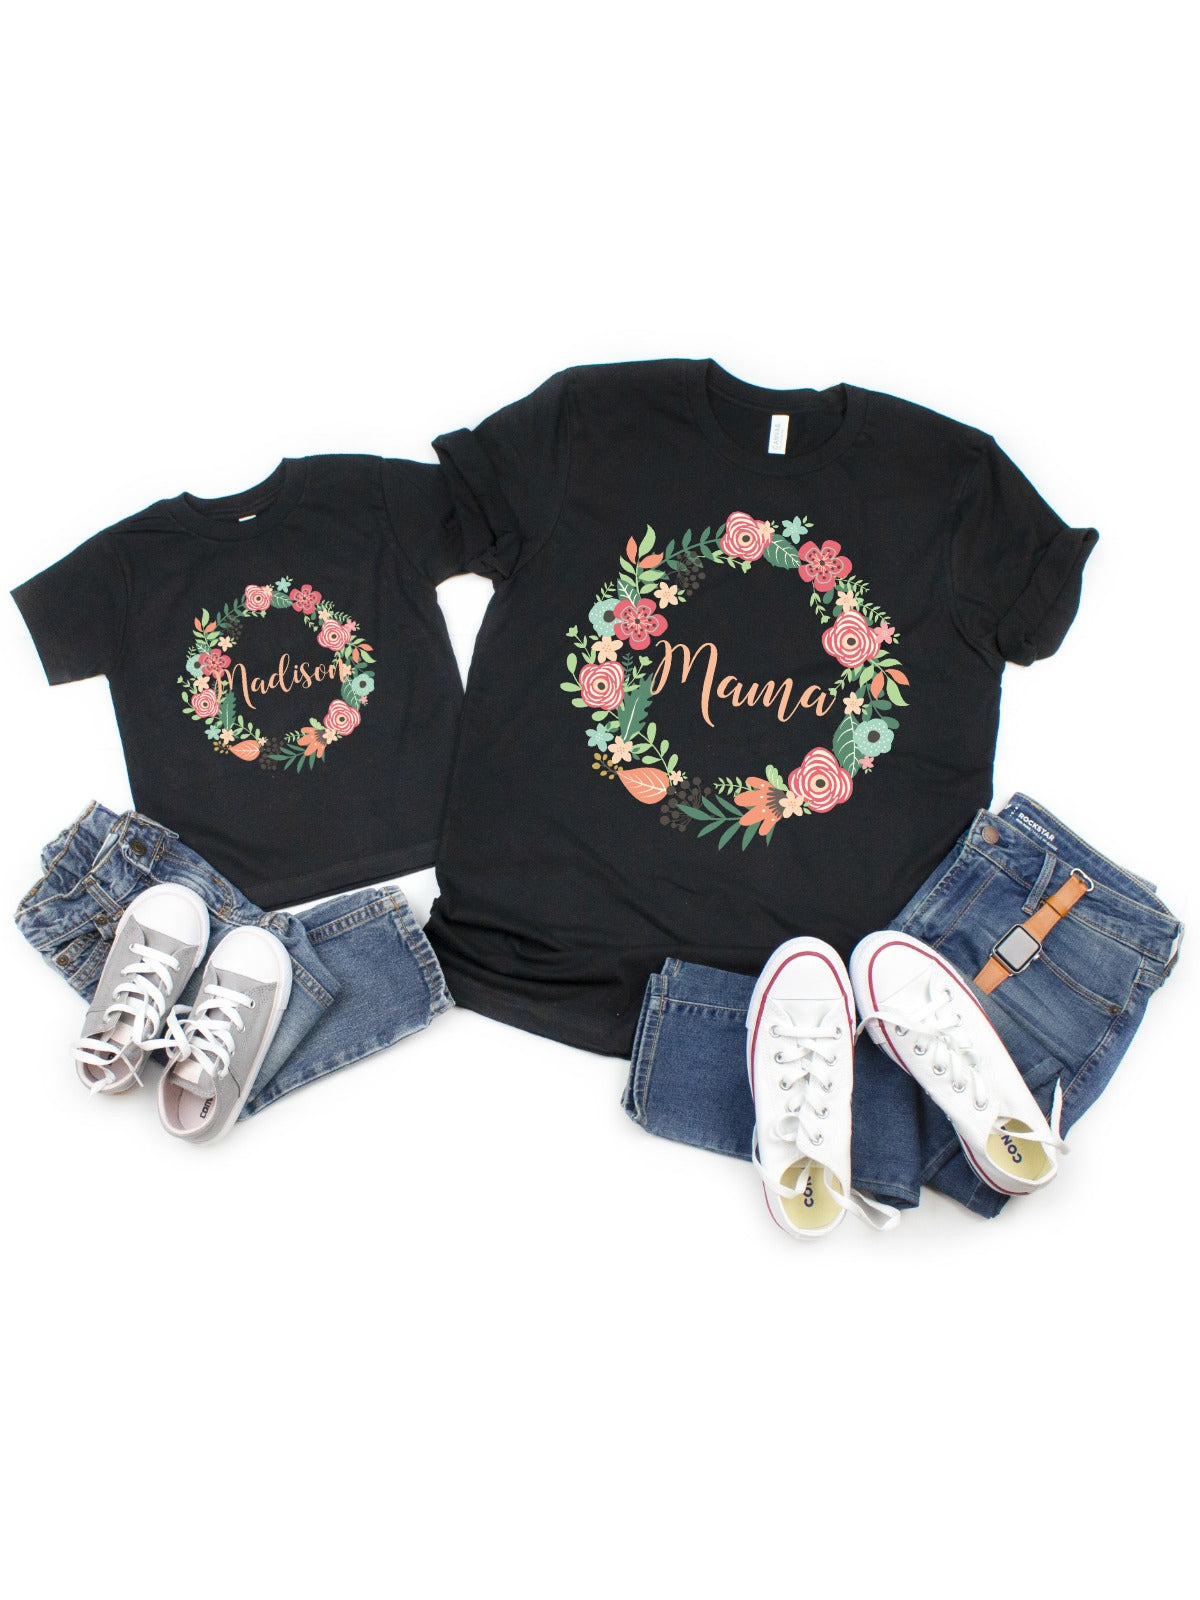 mother daughter matching shirts set of two